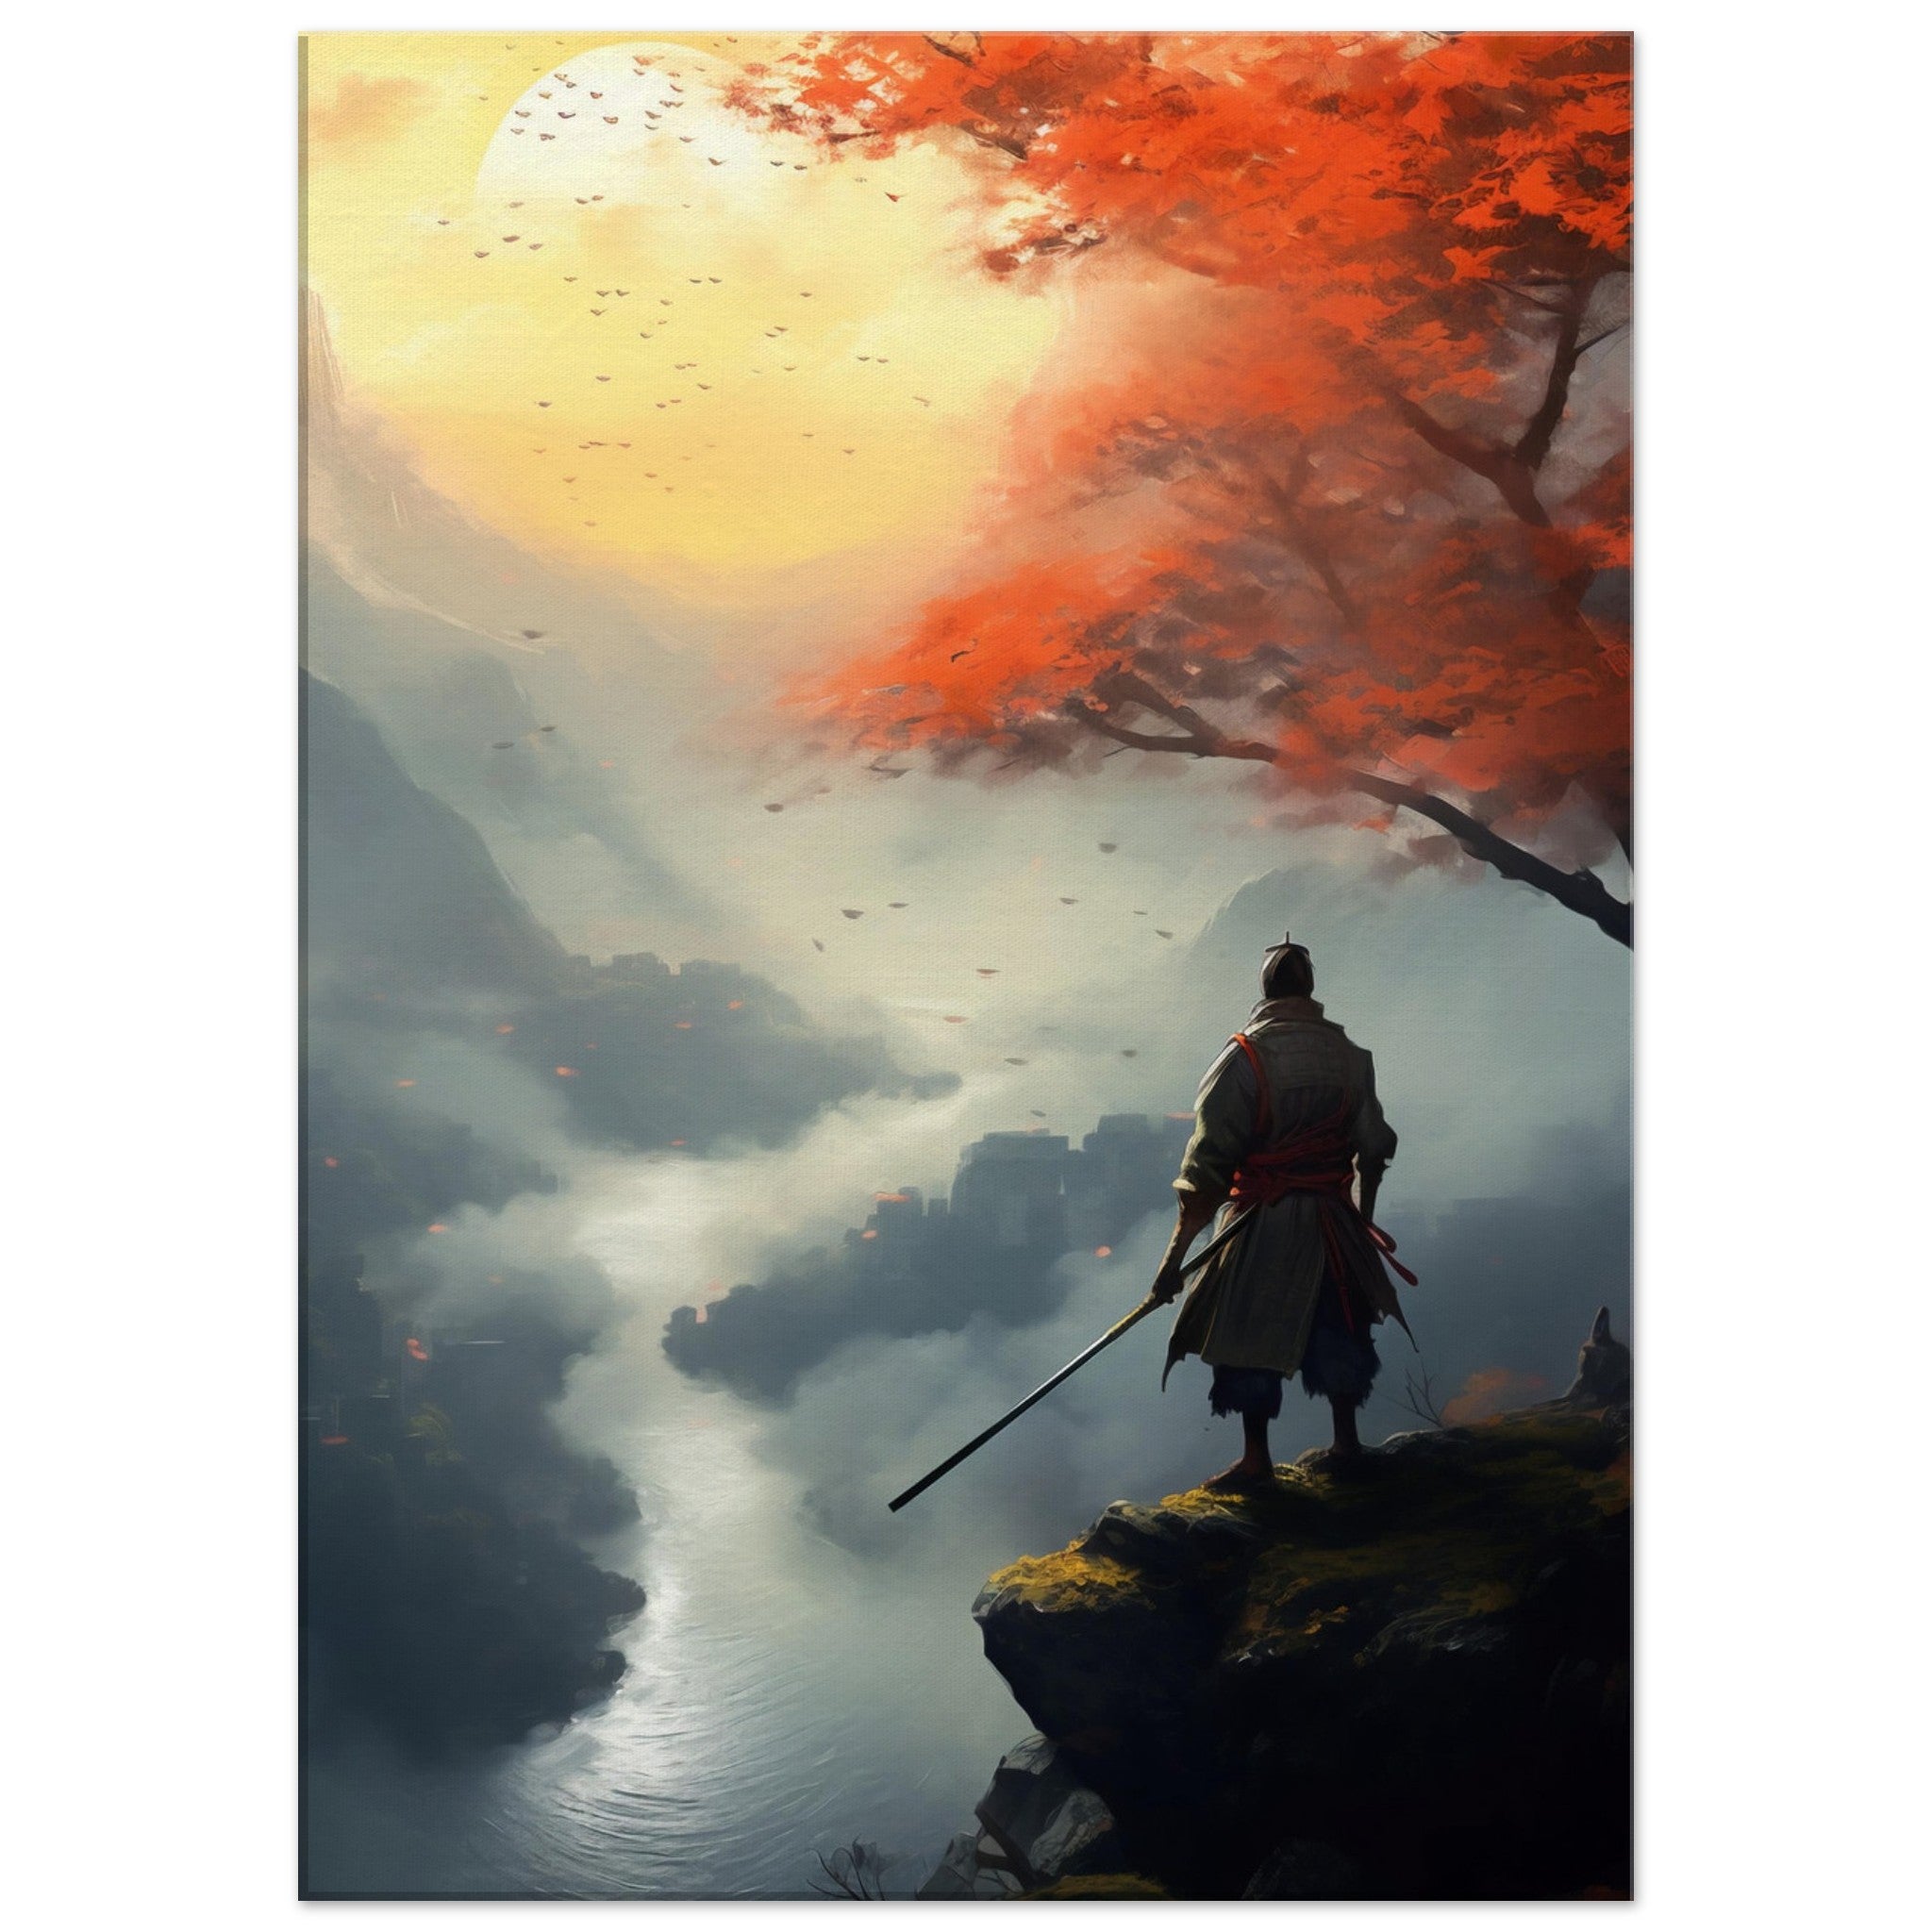 A samurai looking at sunset - immersiarts